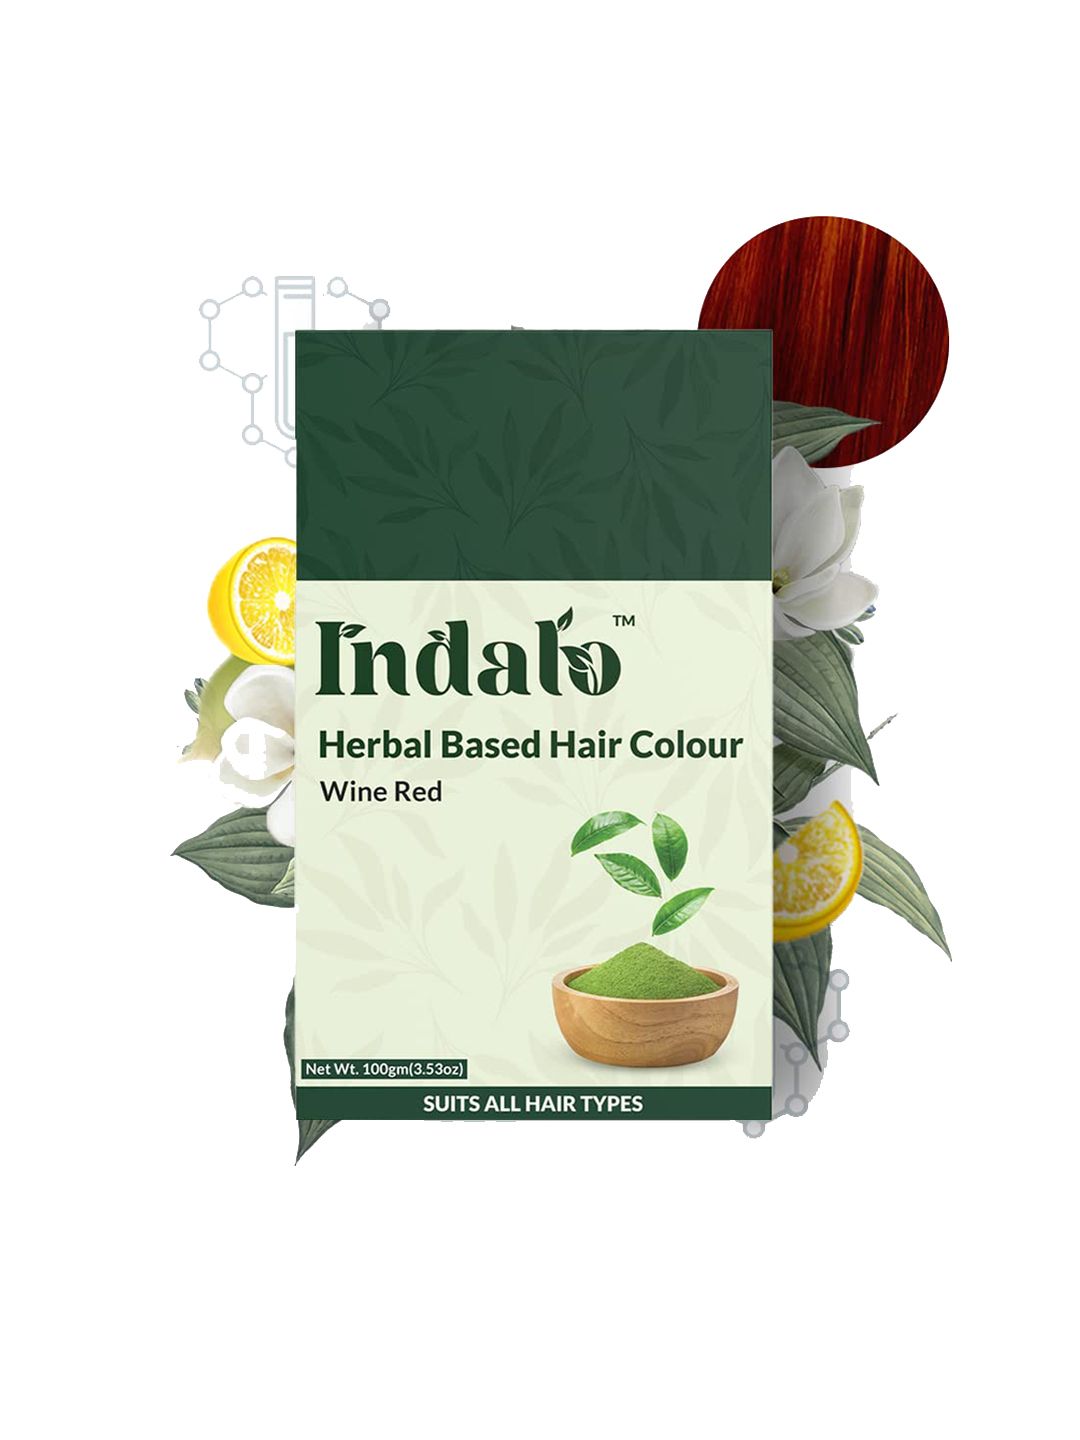 INDALO Herbal Based Hair Colour Wine Red 100 gm Price in India